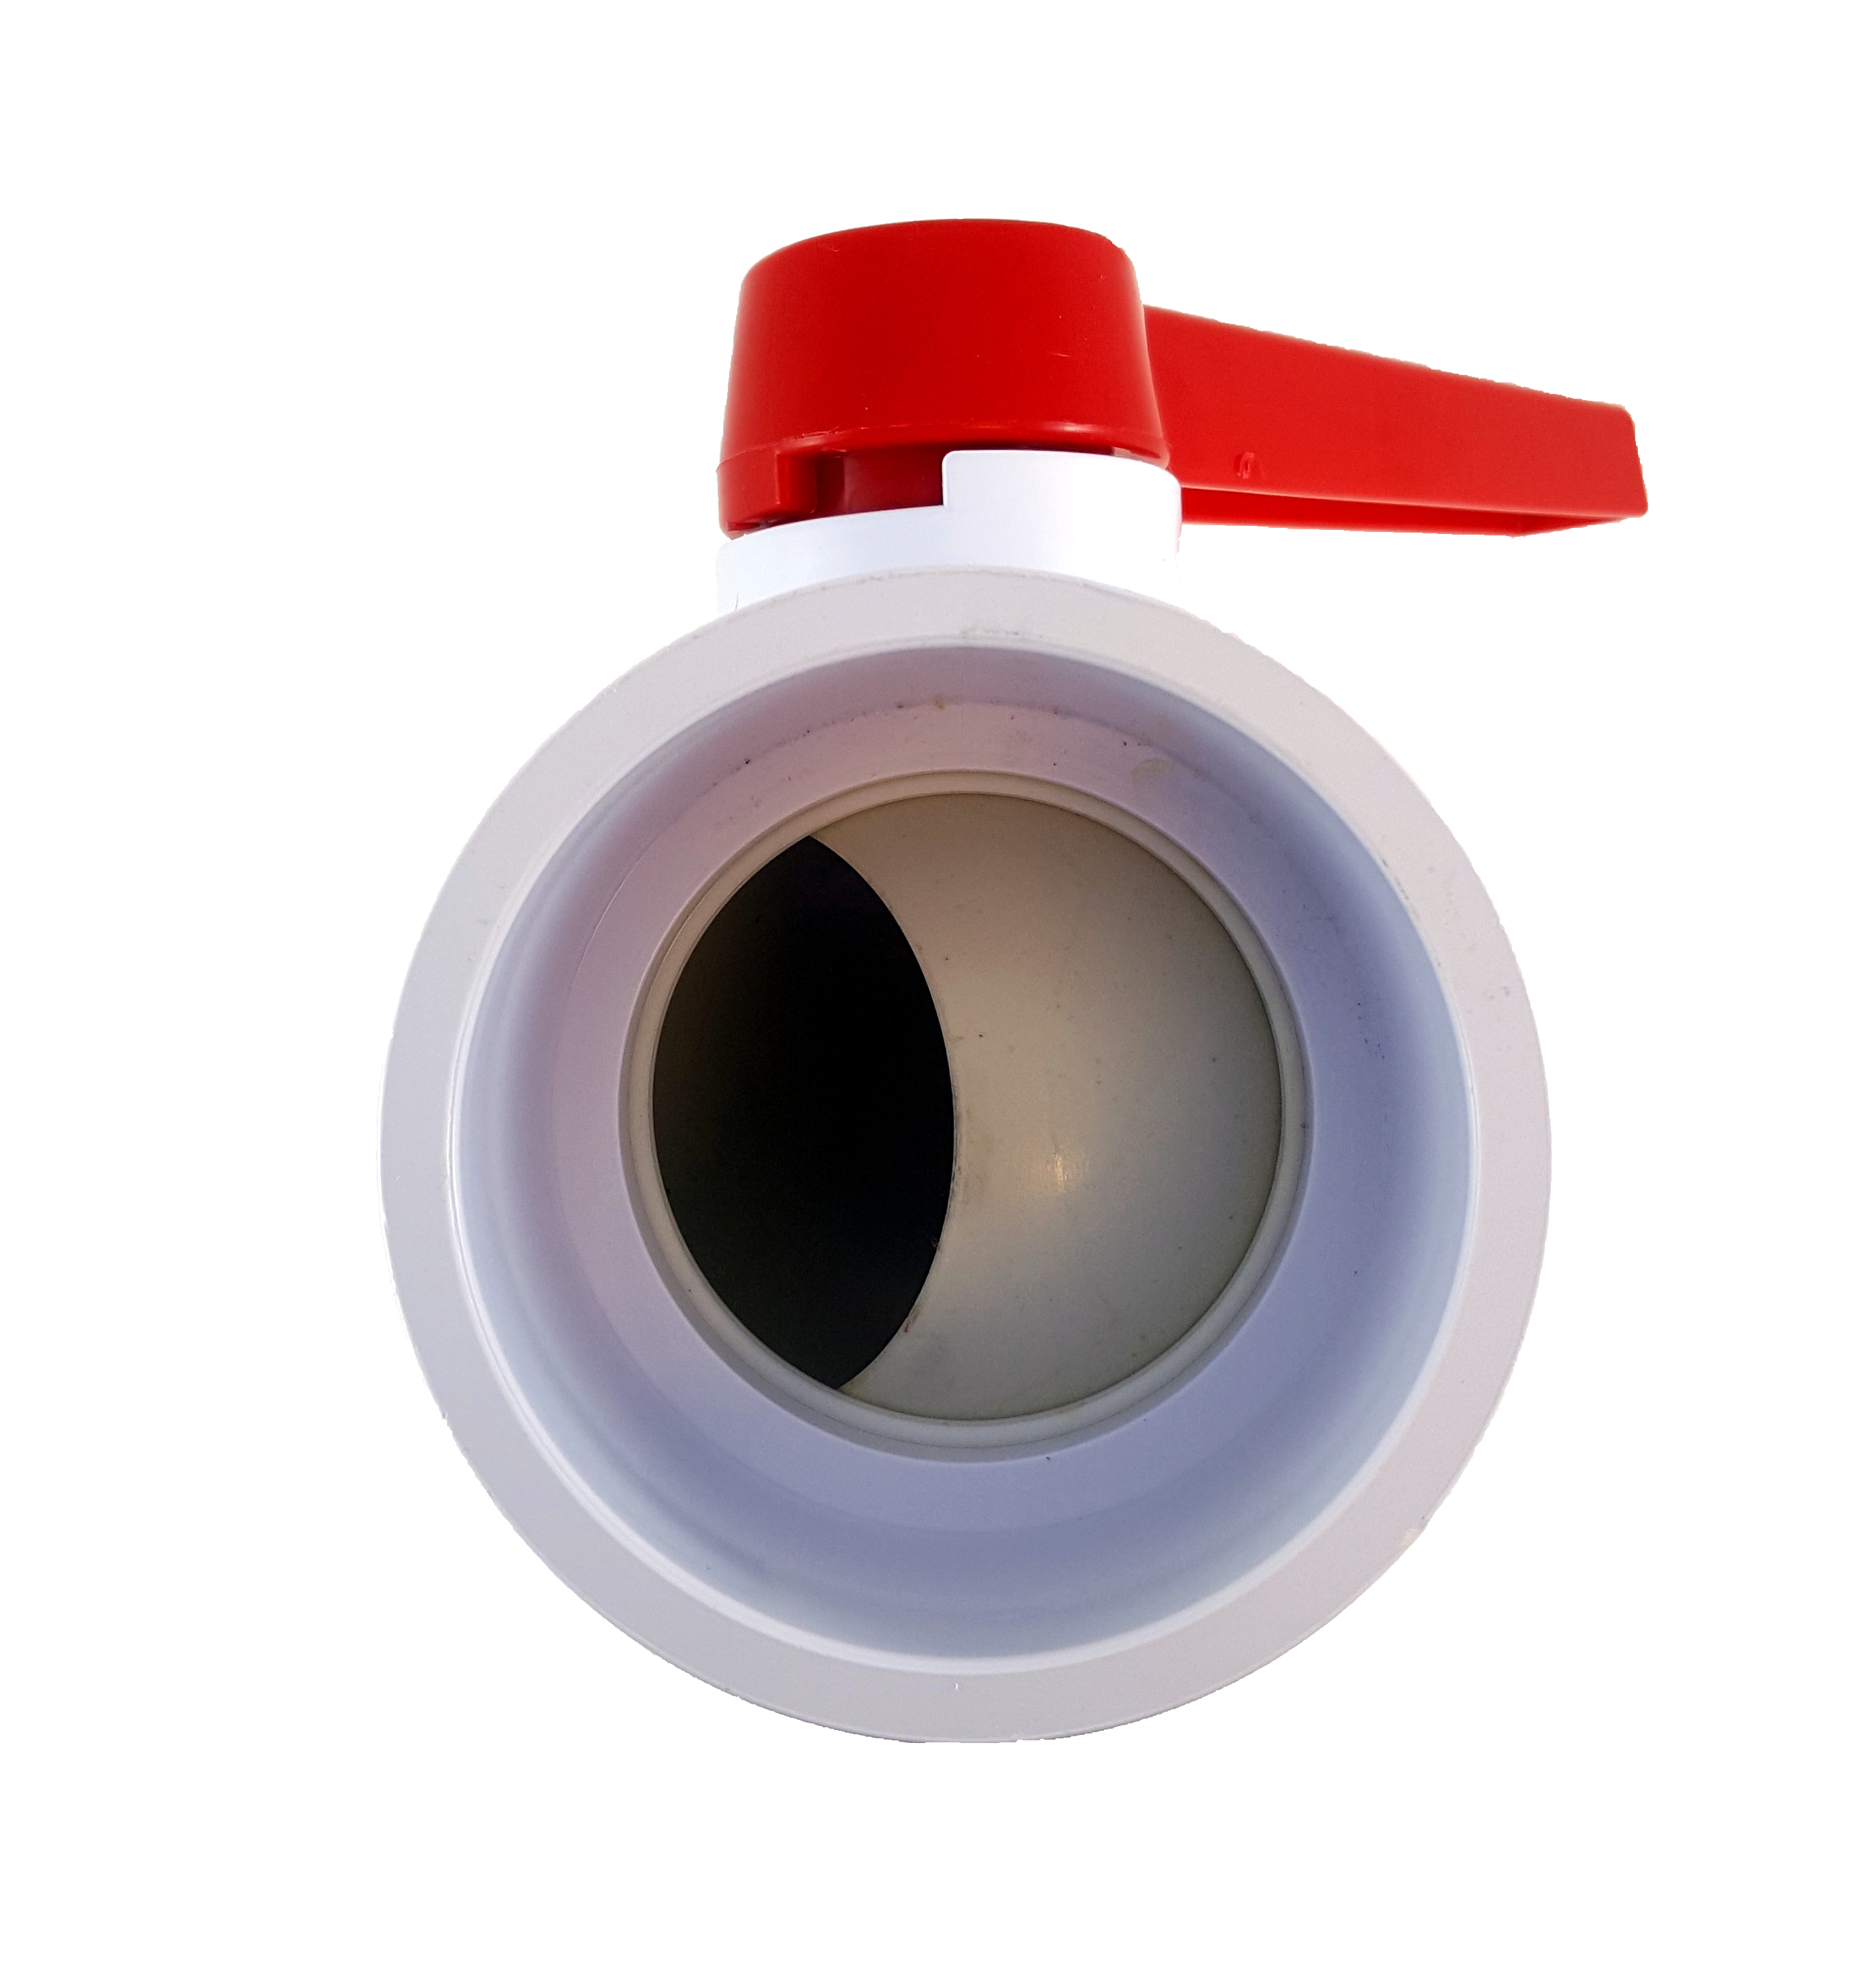 PVC COMPACT BALL VALVE 3" - Socket - Sanipro - (Pack of 2) - image 2 of 3